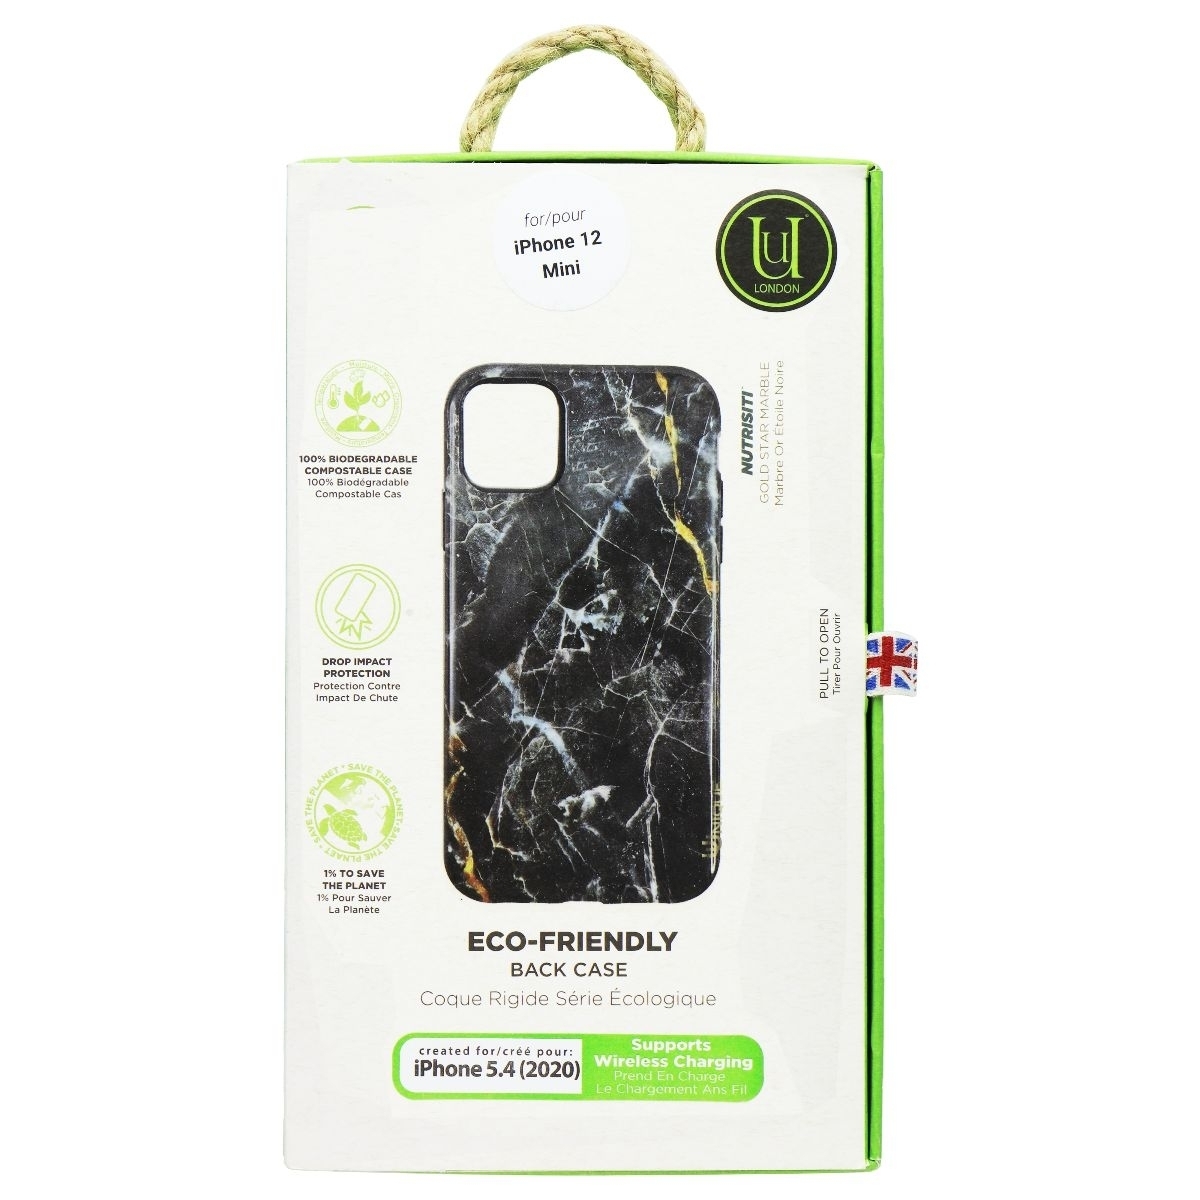 Uunique London Eco-Friendly Case For Apple IPhone 12 Mini - Black Marble (Refurbished)